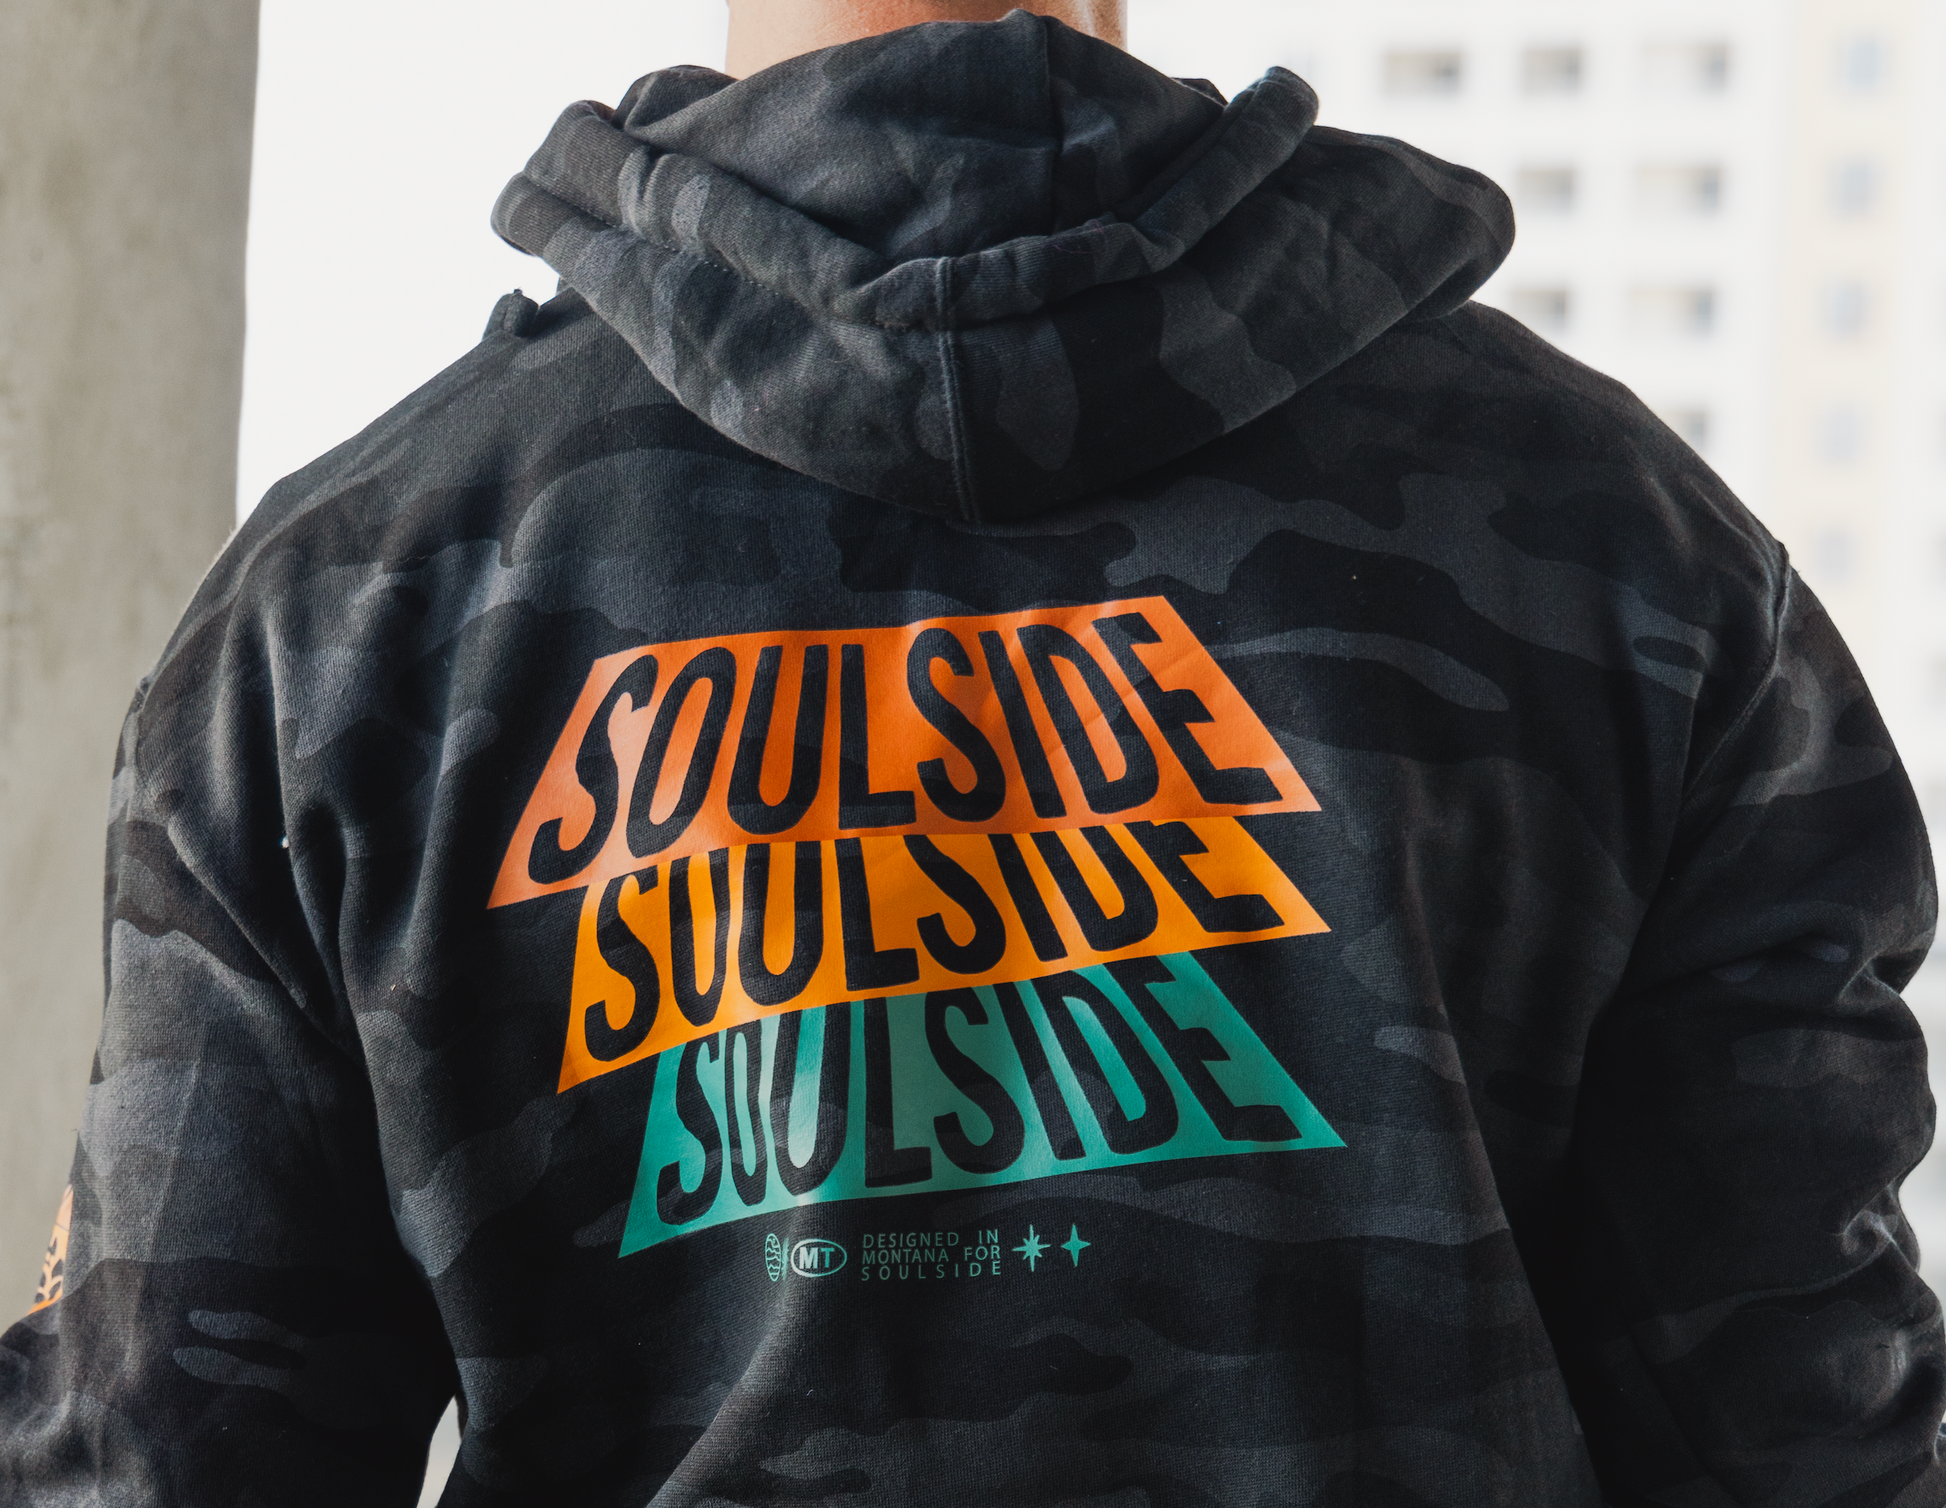 Image of athletic man in a gym wearing Soulside Industry hoodie. The image is of the back of the cozy black camo hoodie, showing the industry artist design on the back with orange, yellow and turquoise lettering that says Soulside.